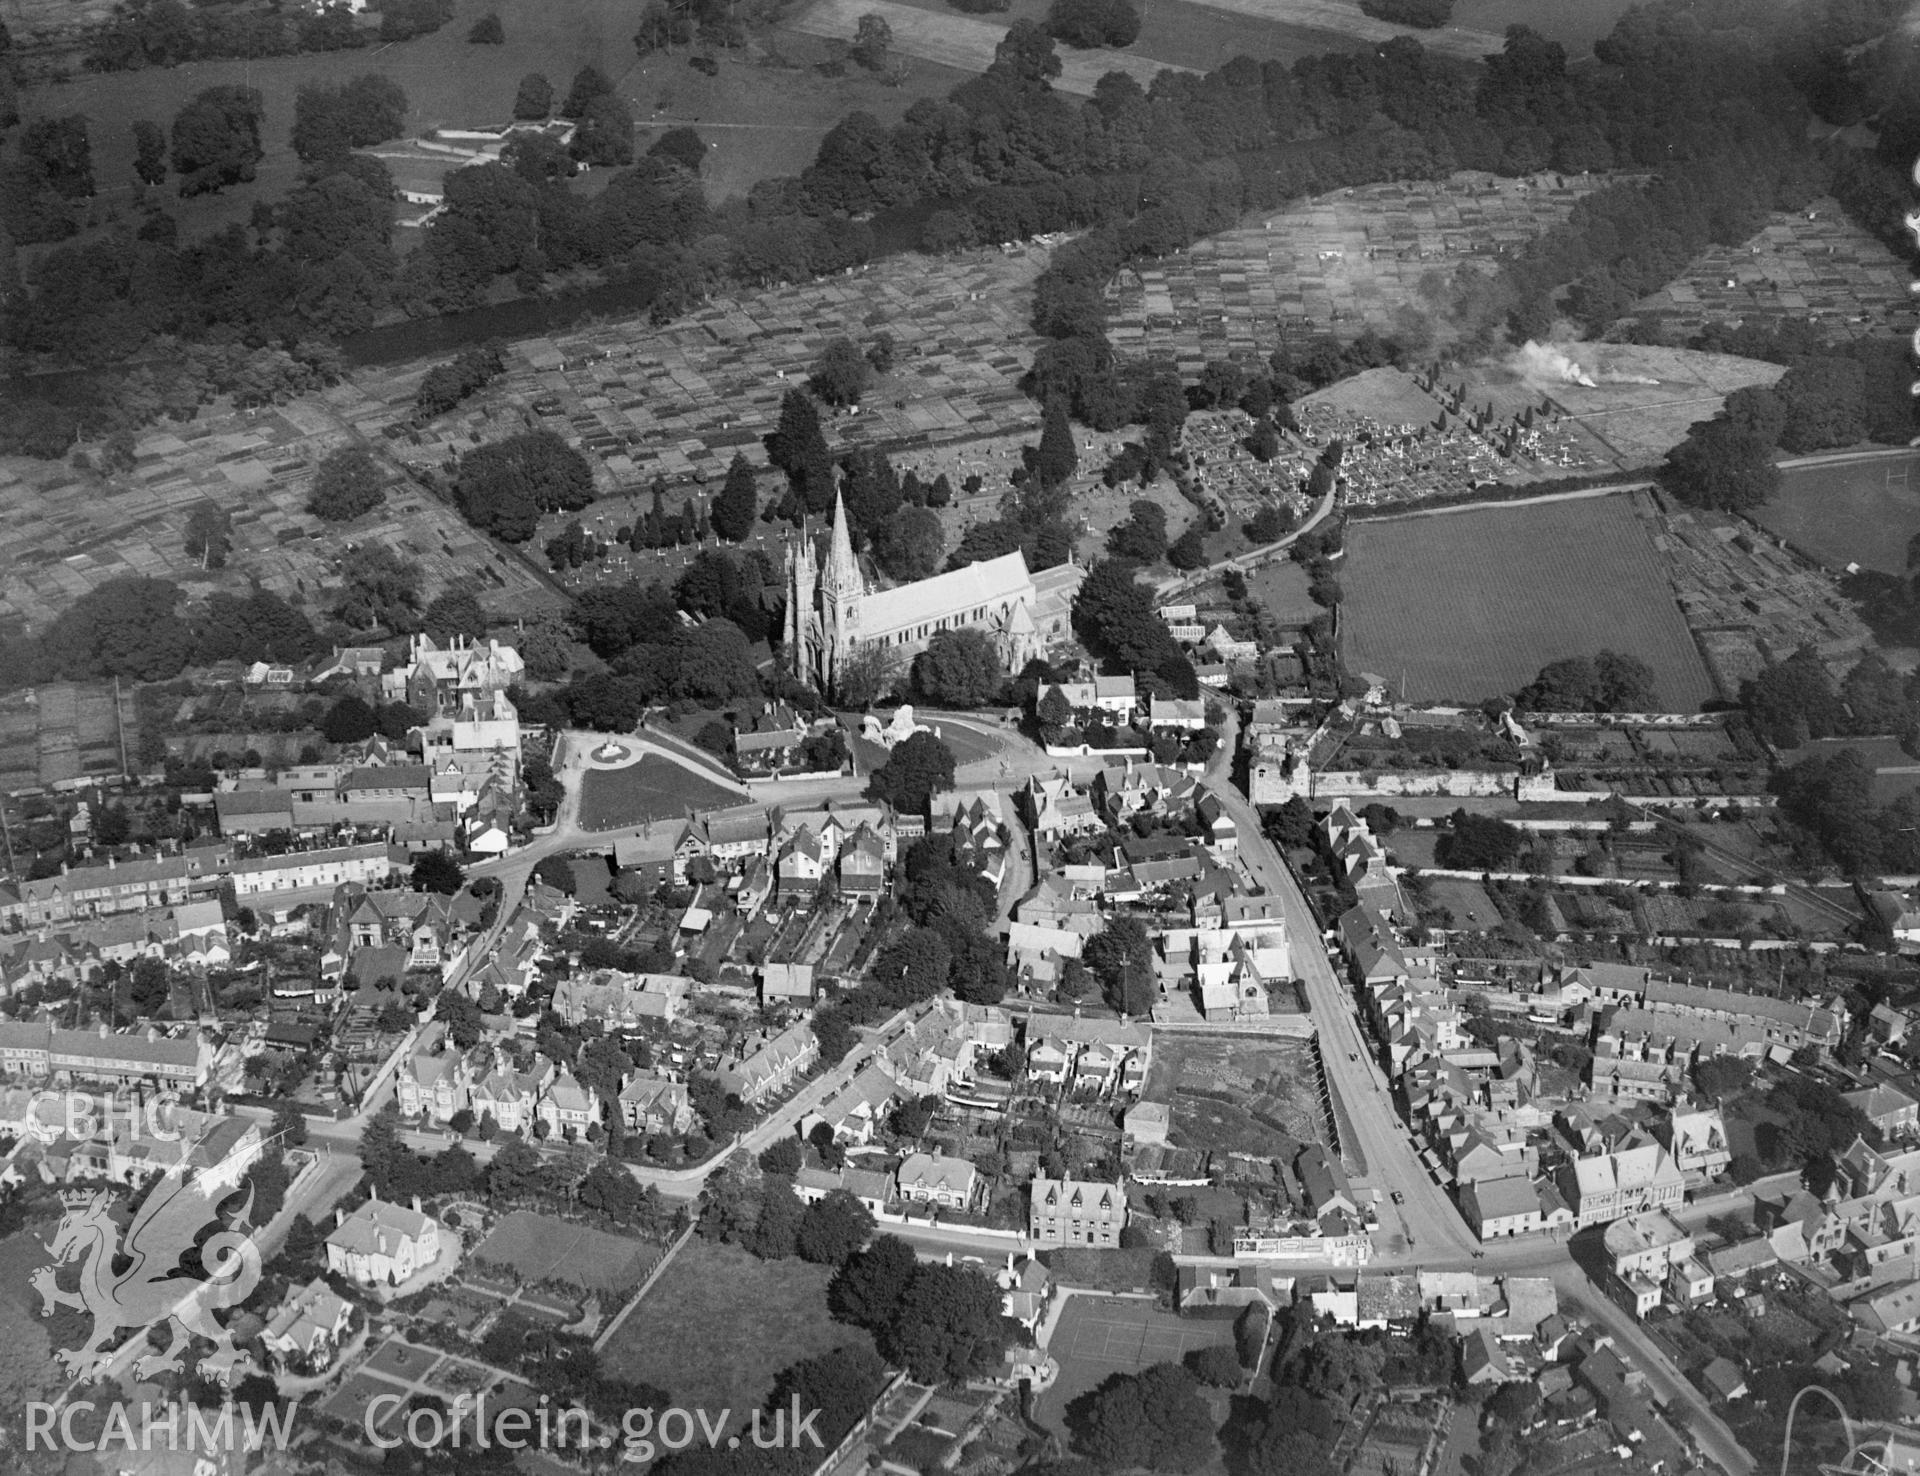 Llandaff Cathedral and surrounding area, oblique aerial view. 5?x4? black and white glass plate negative.